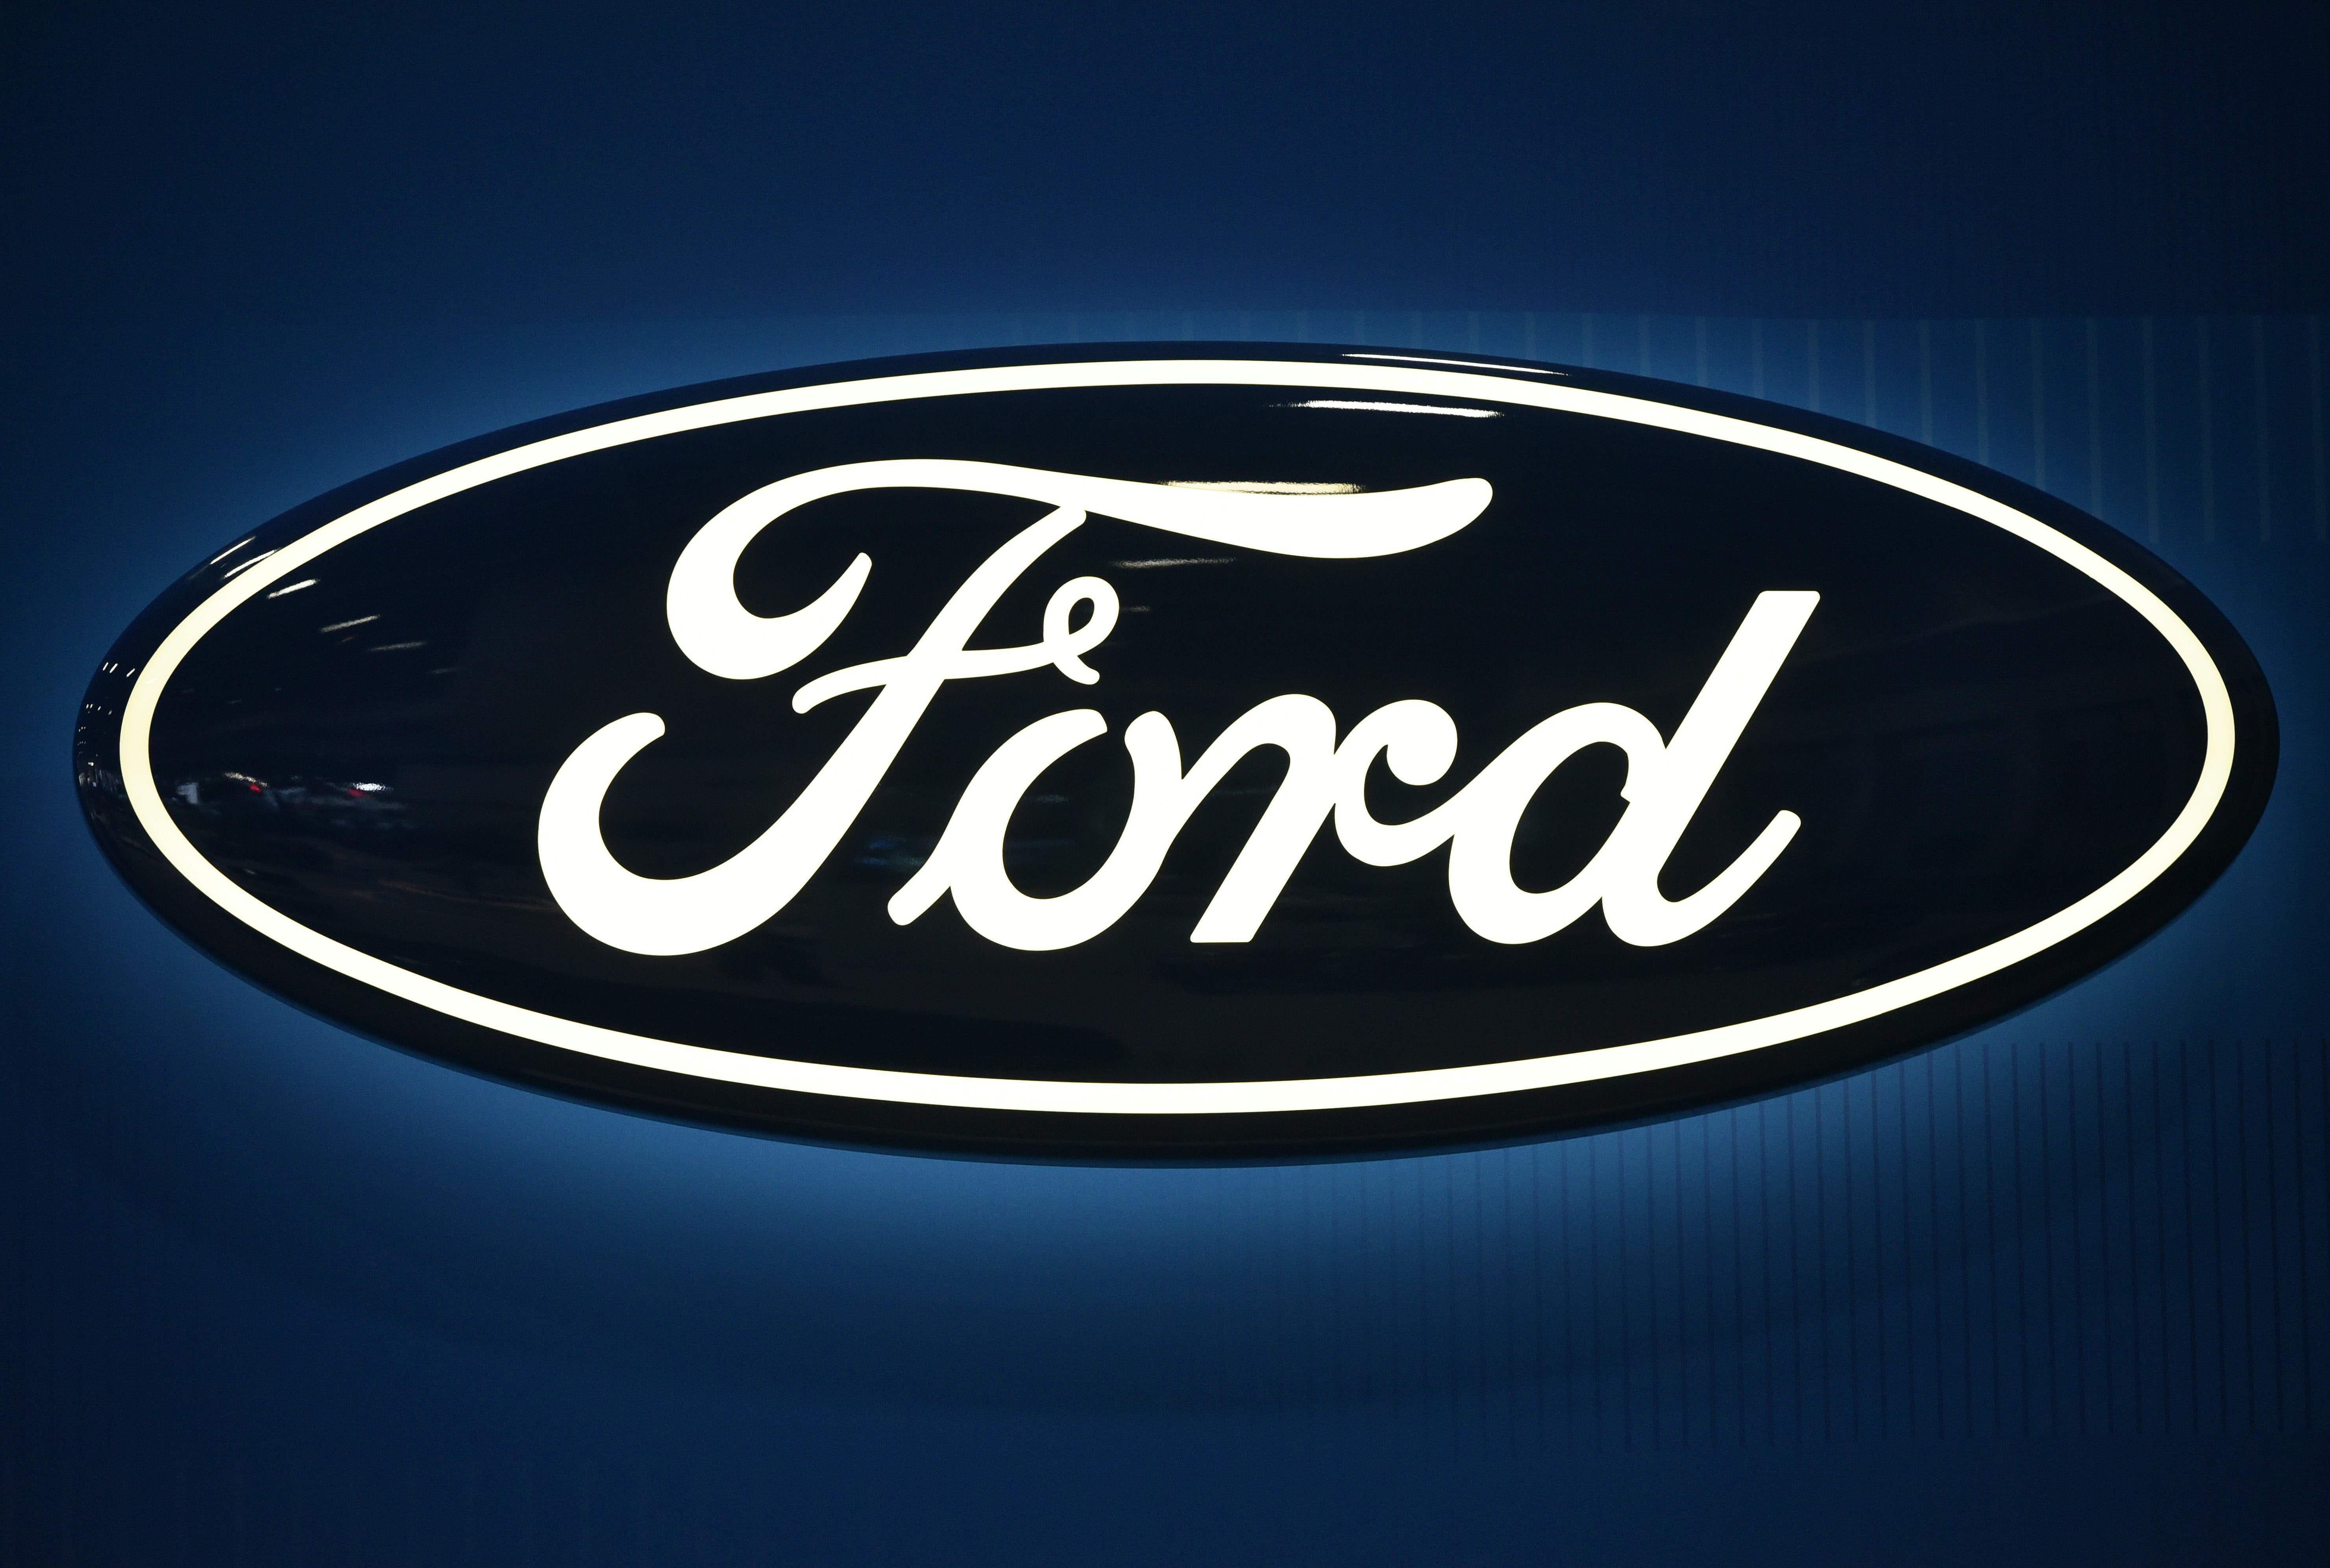 Ford Motor Co. has named Tim Stone its next CFO